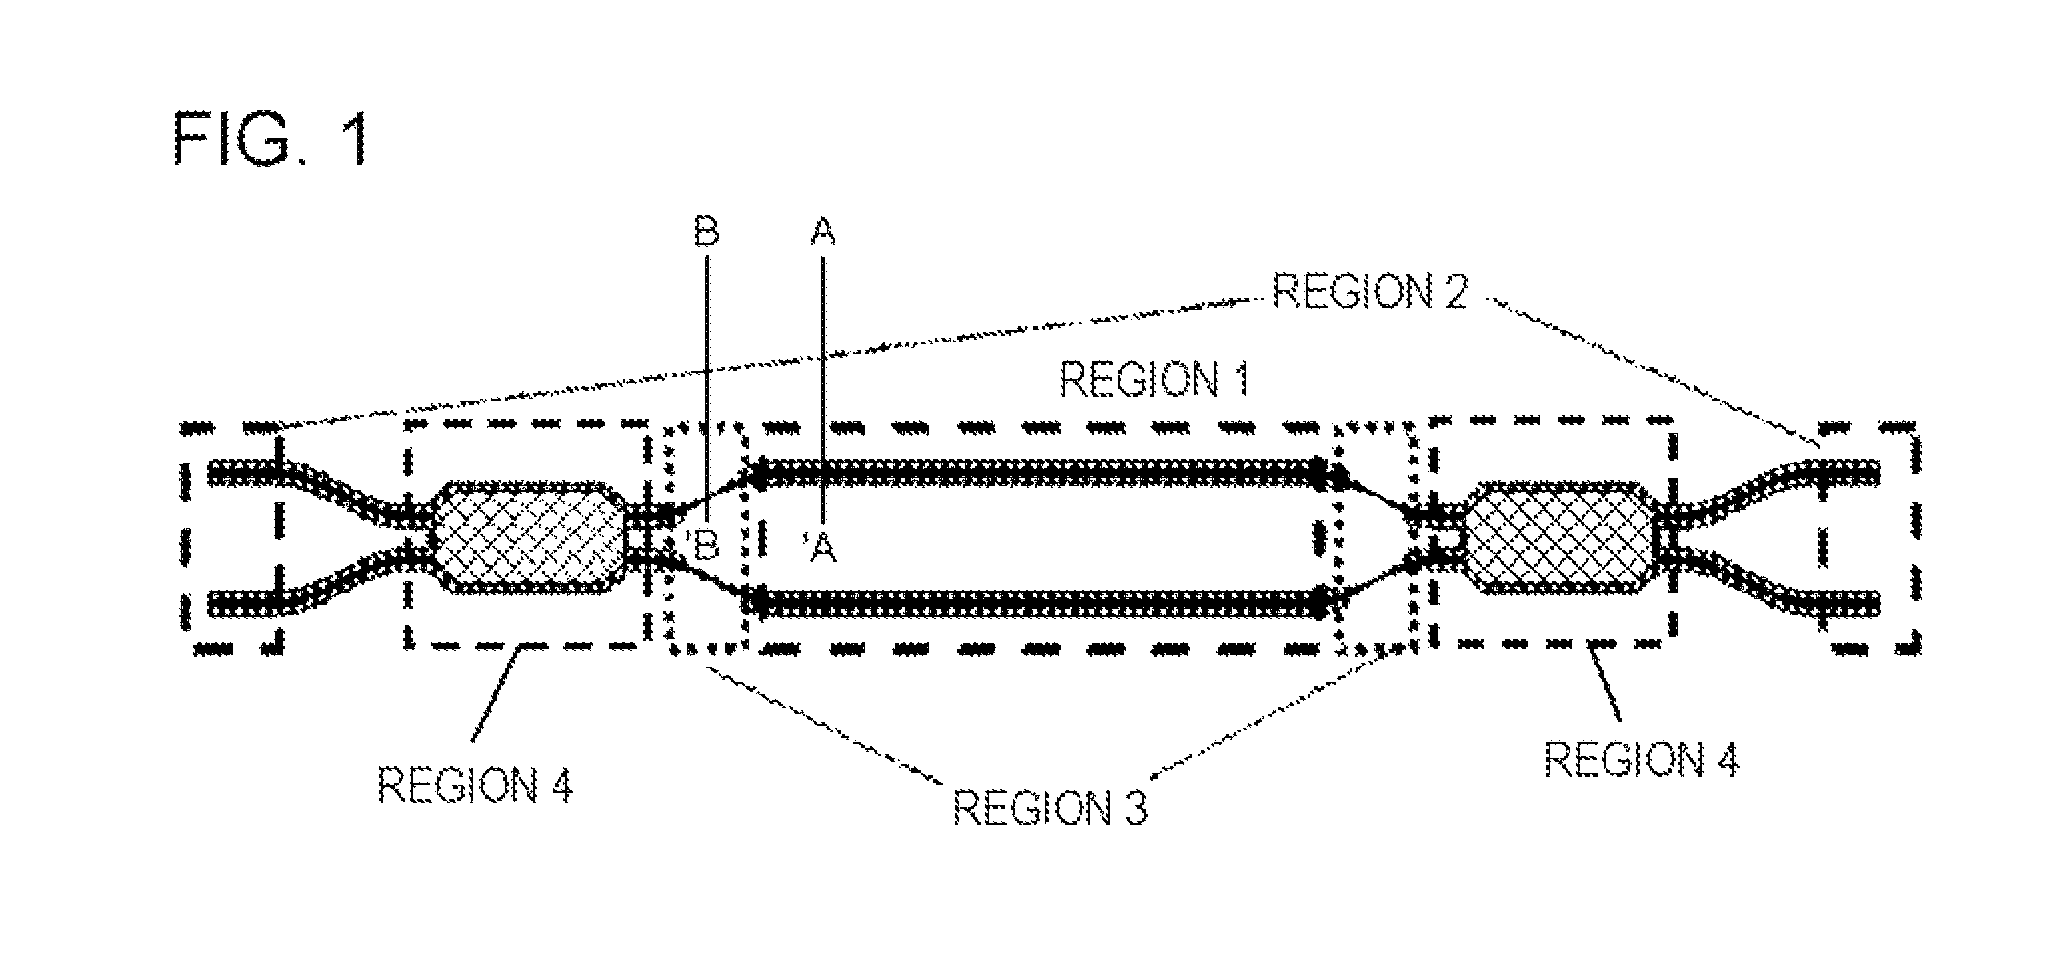 Semiconductor optical modulator, semiconductor optical integrated device, and method of manufacturing the same